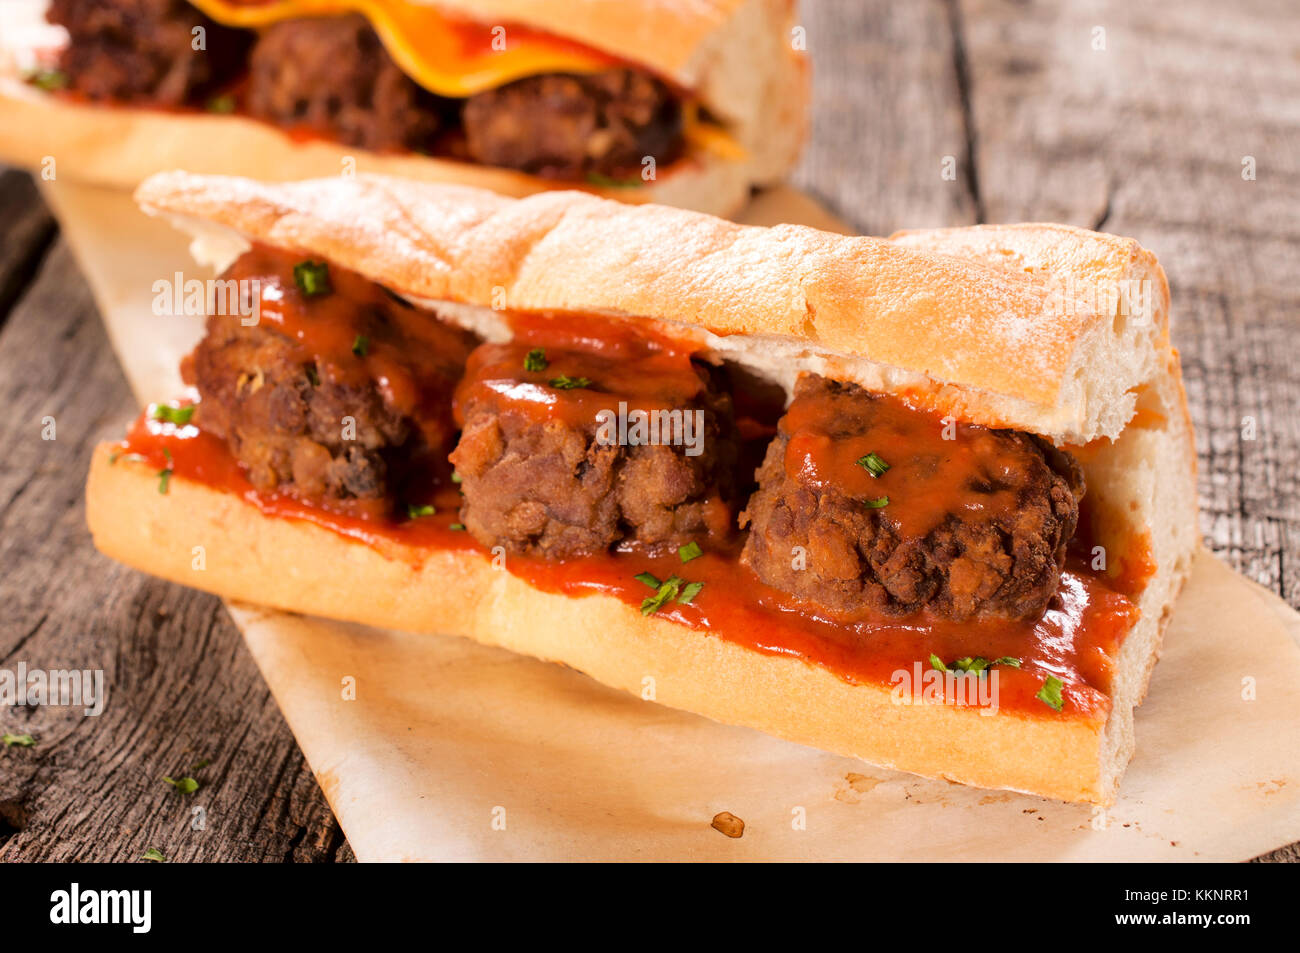 Meat balls and homemade tomato sauce in the bread Stock Photo